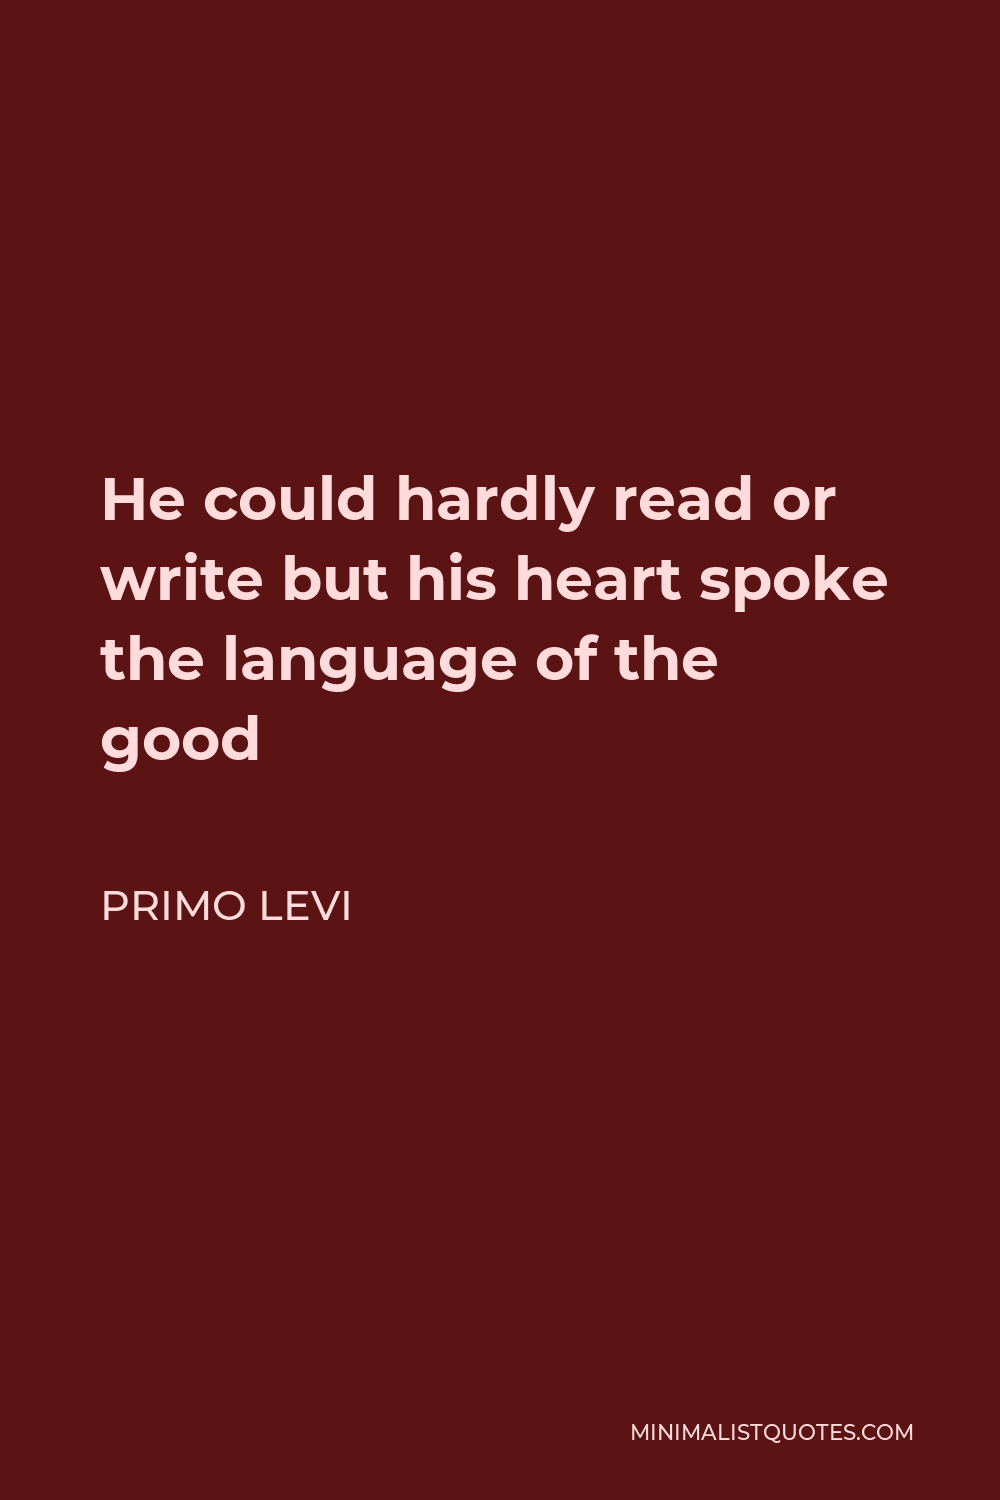 Primo Levi Quote - He could hardly read or write but his heart spoke the language of the good